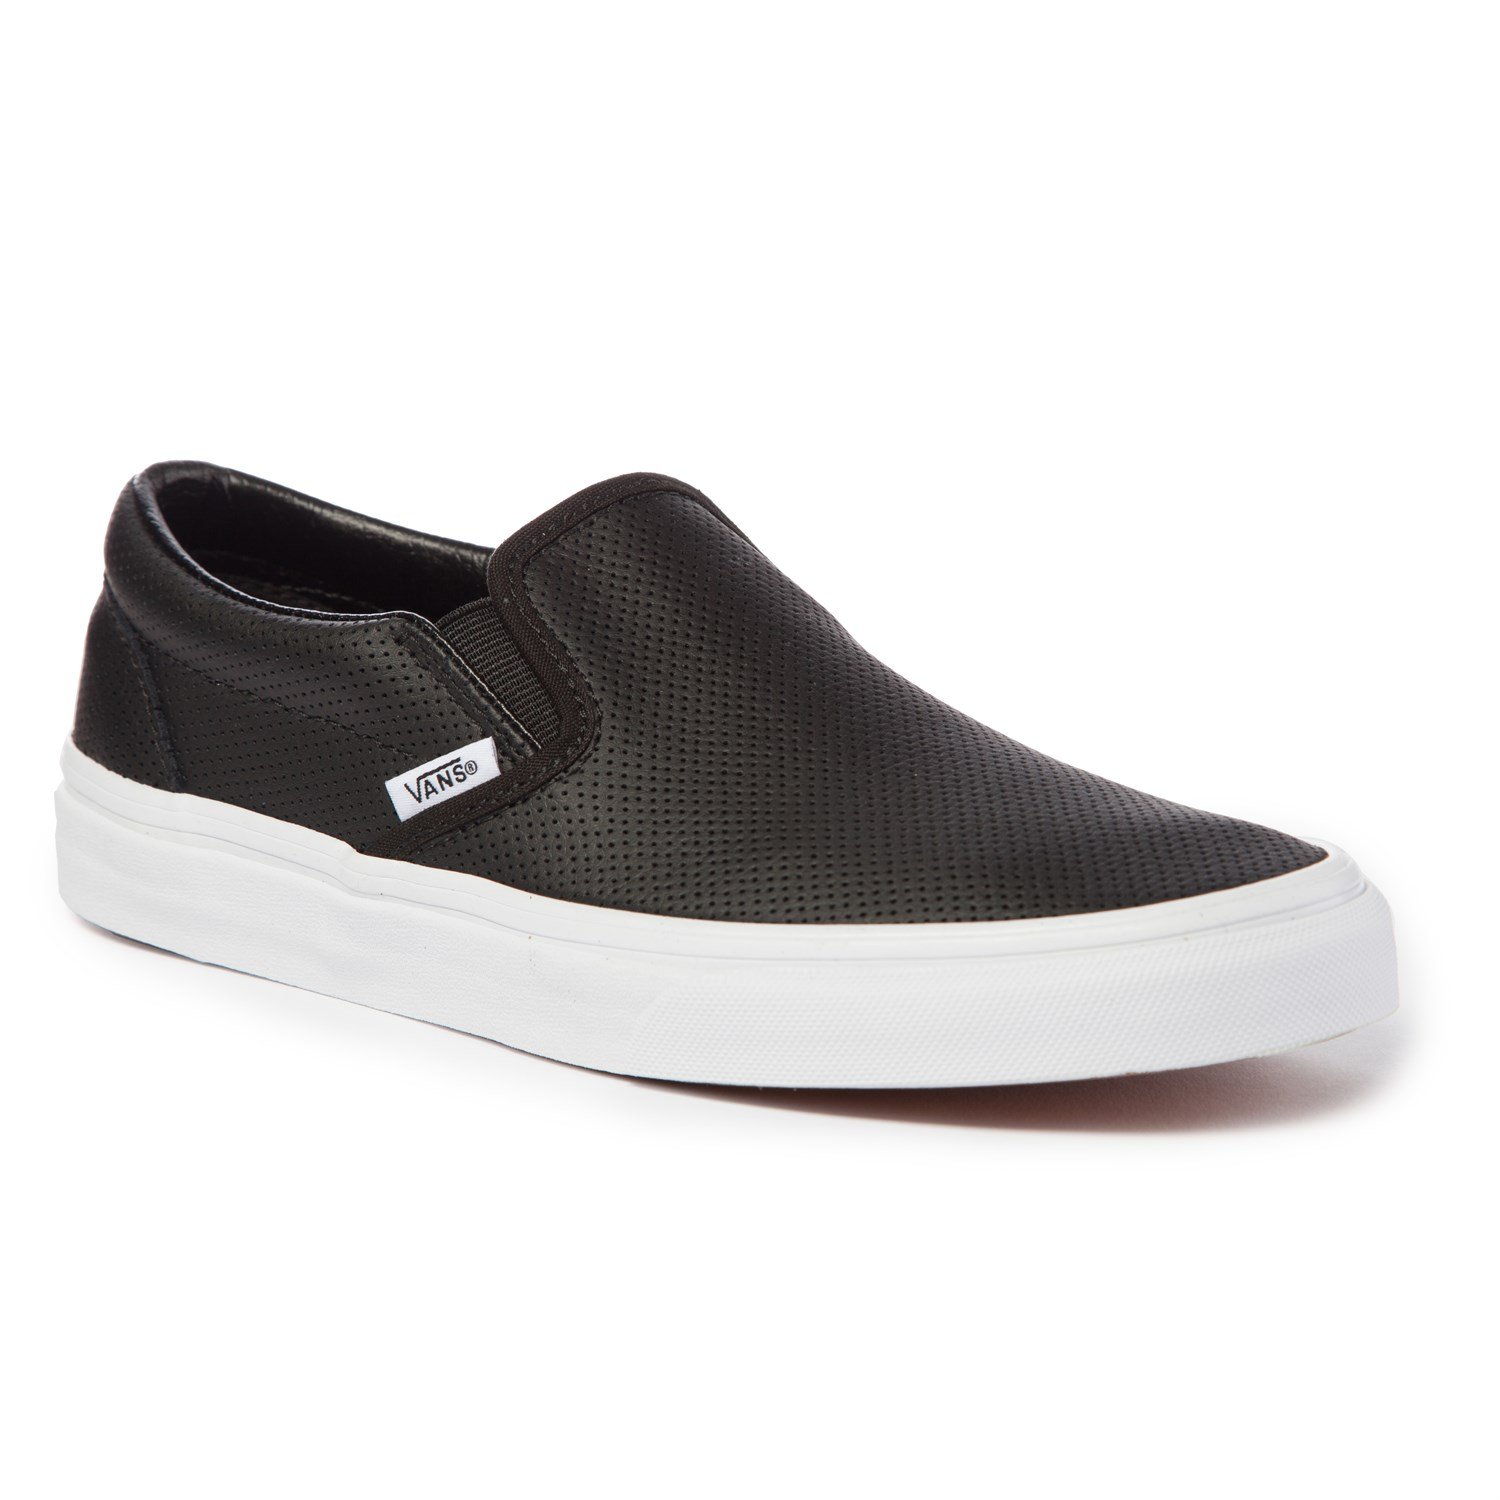 Vans Perf Leather Slip-On Shoes - Women 